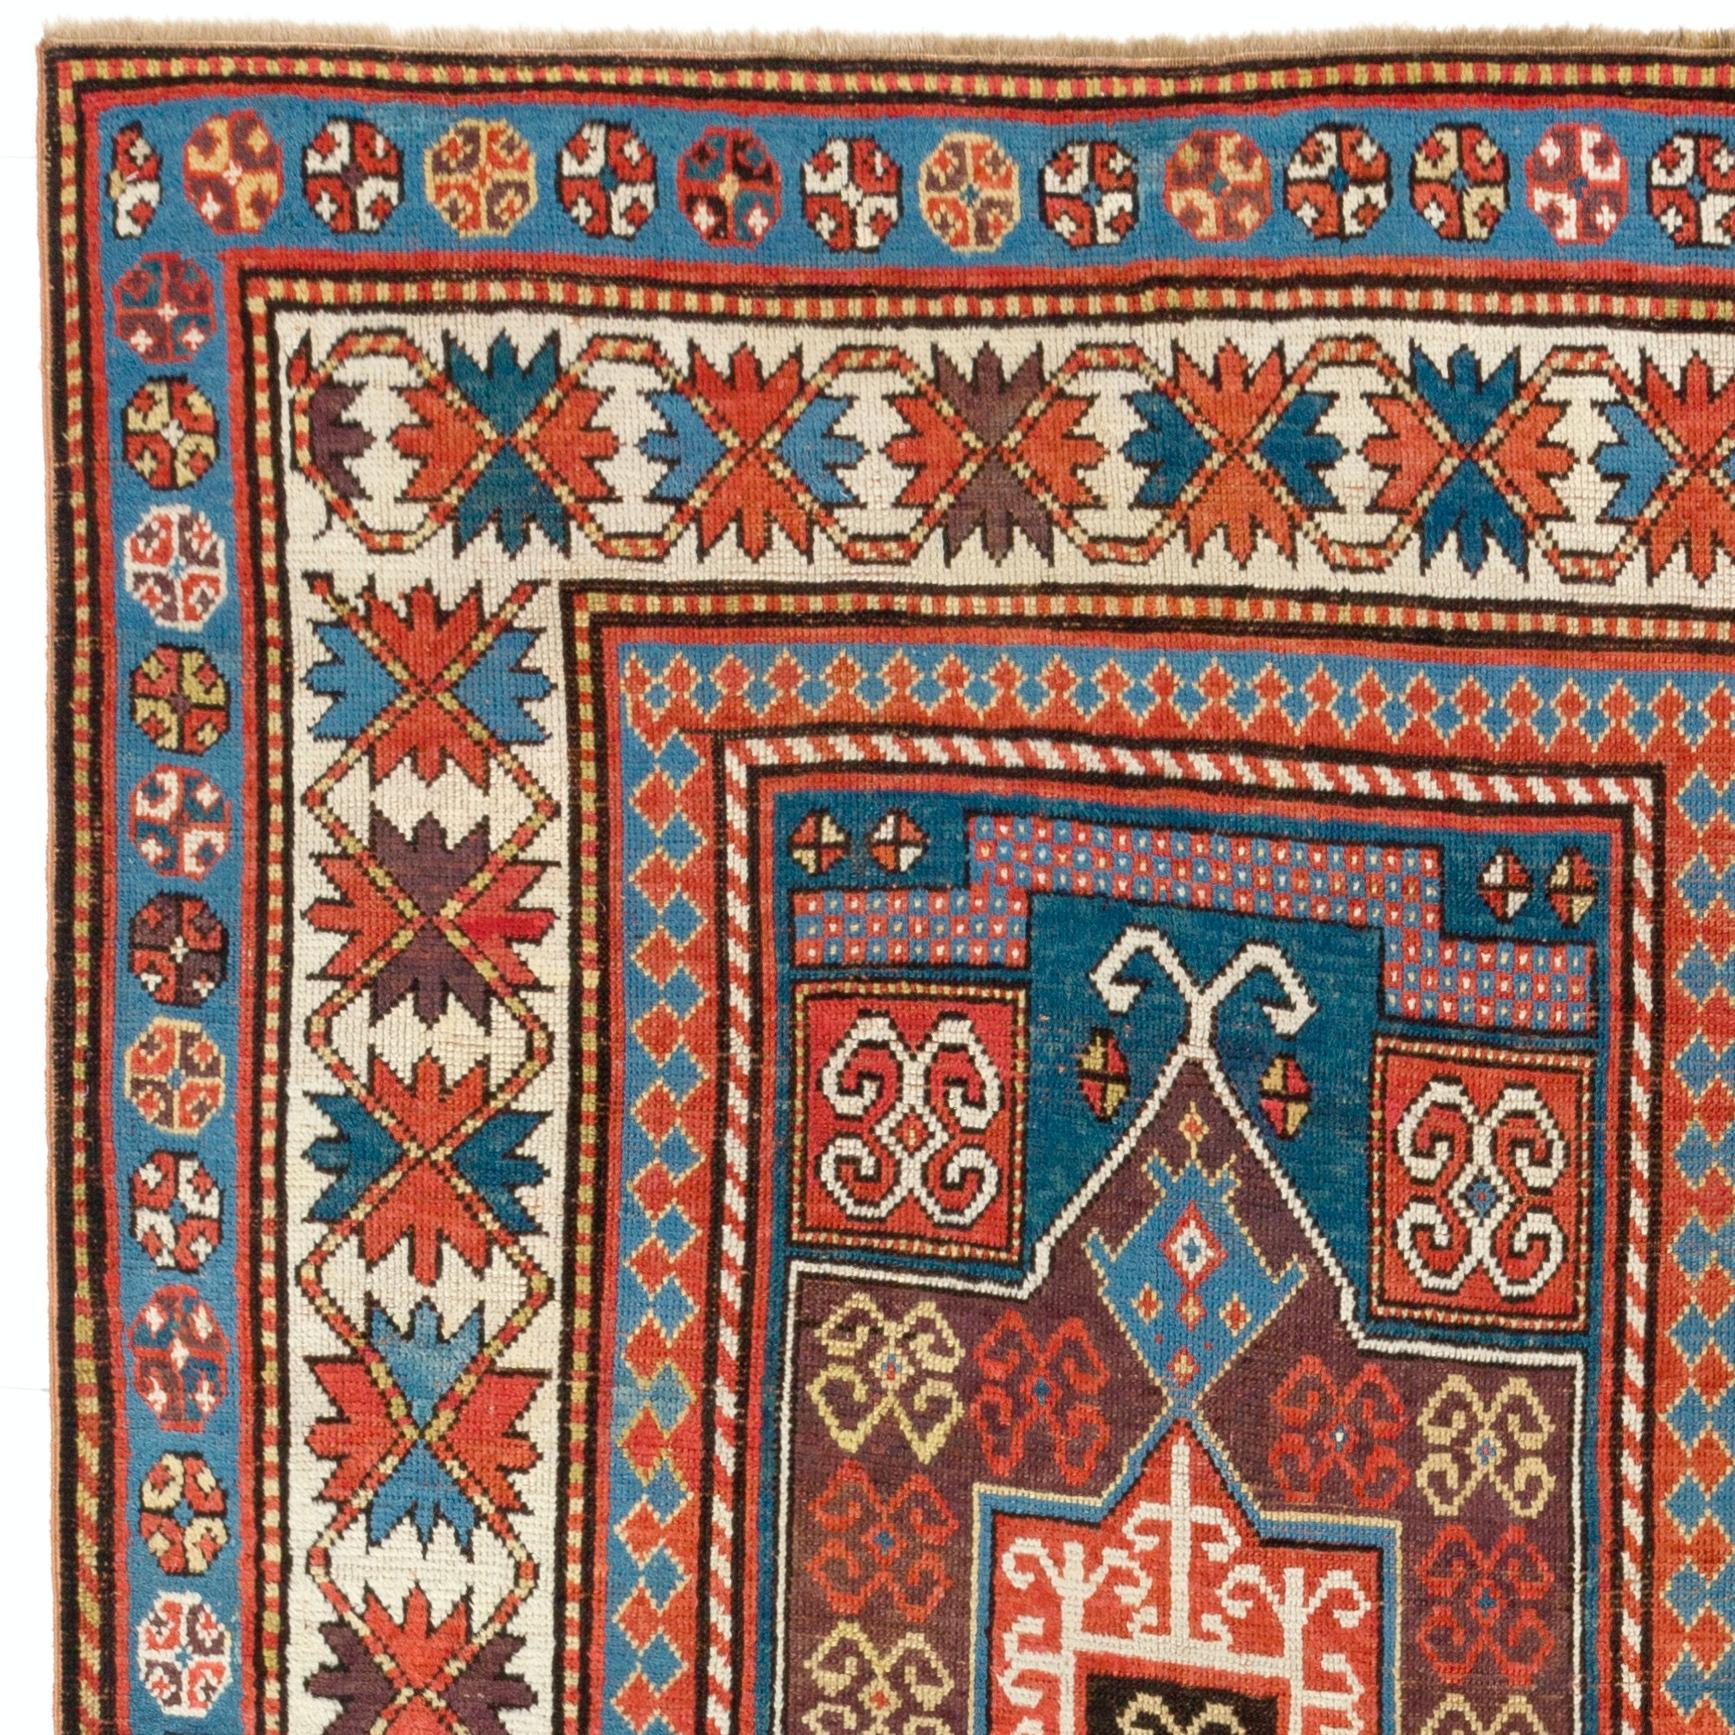 Antique Caucasian Kazak rug. Finely hand-knotted with even medium wool pile on wool foundation. Very good condition, no issues, washed professionally.  Measures: 4 x 8 ft.